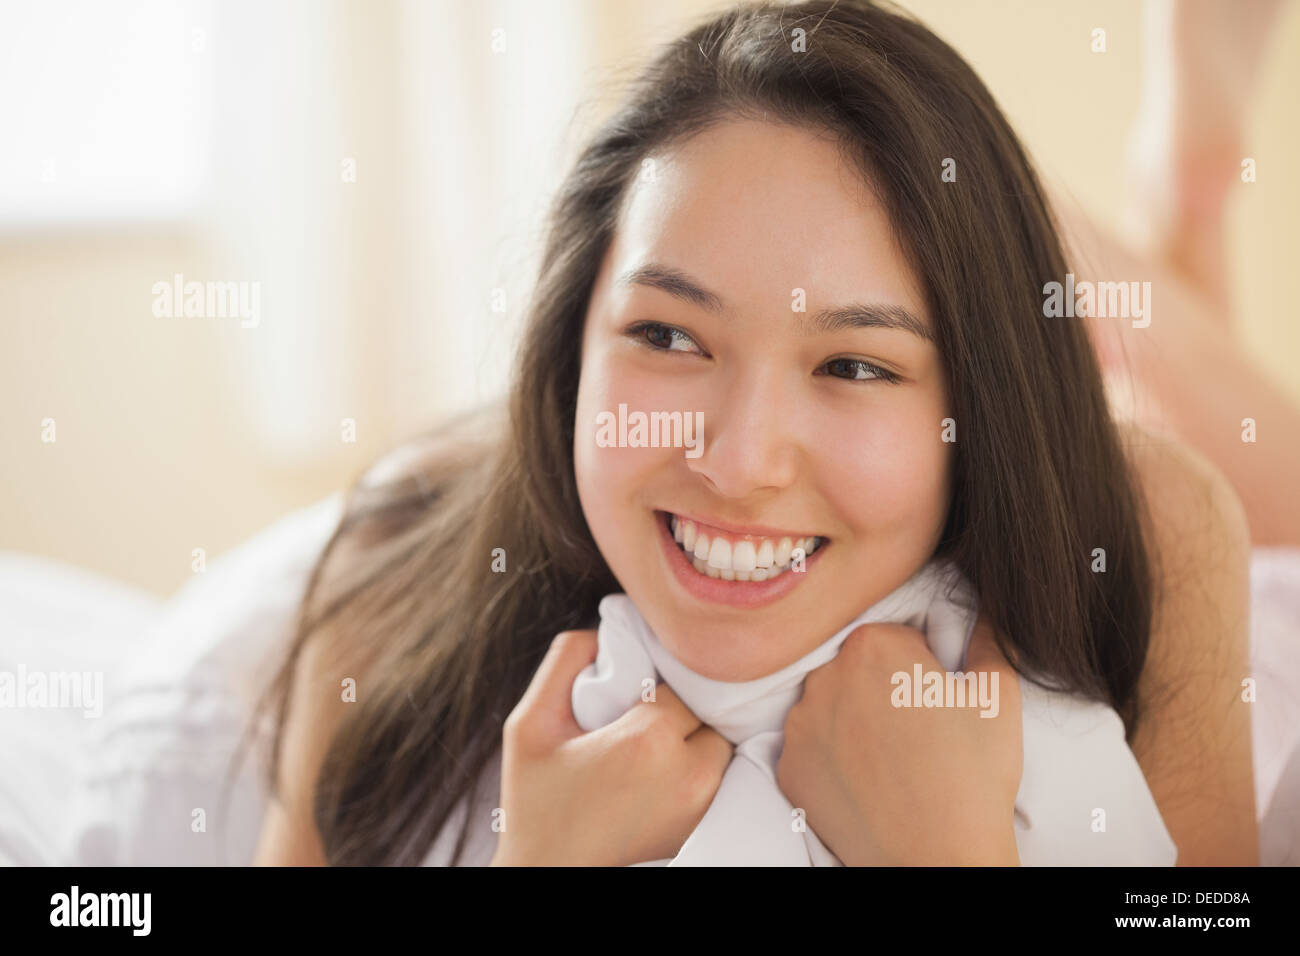 Cute young asian woman holding her duvet and smiling Stock Photo